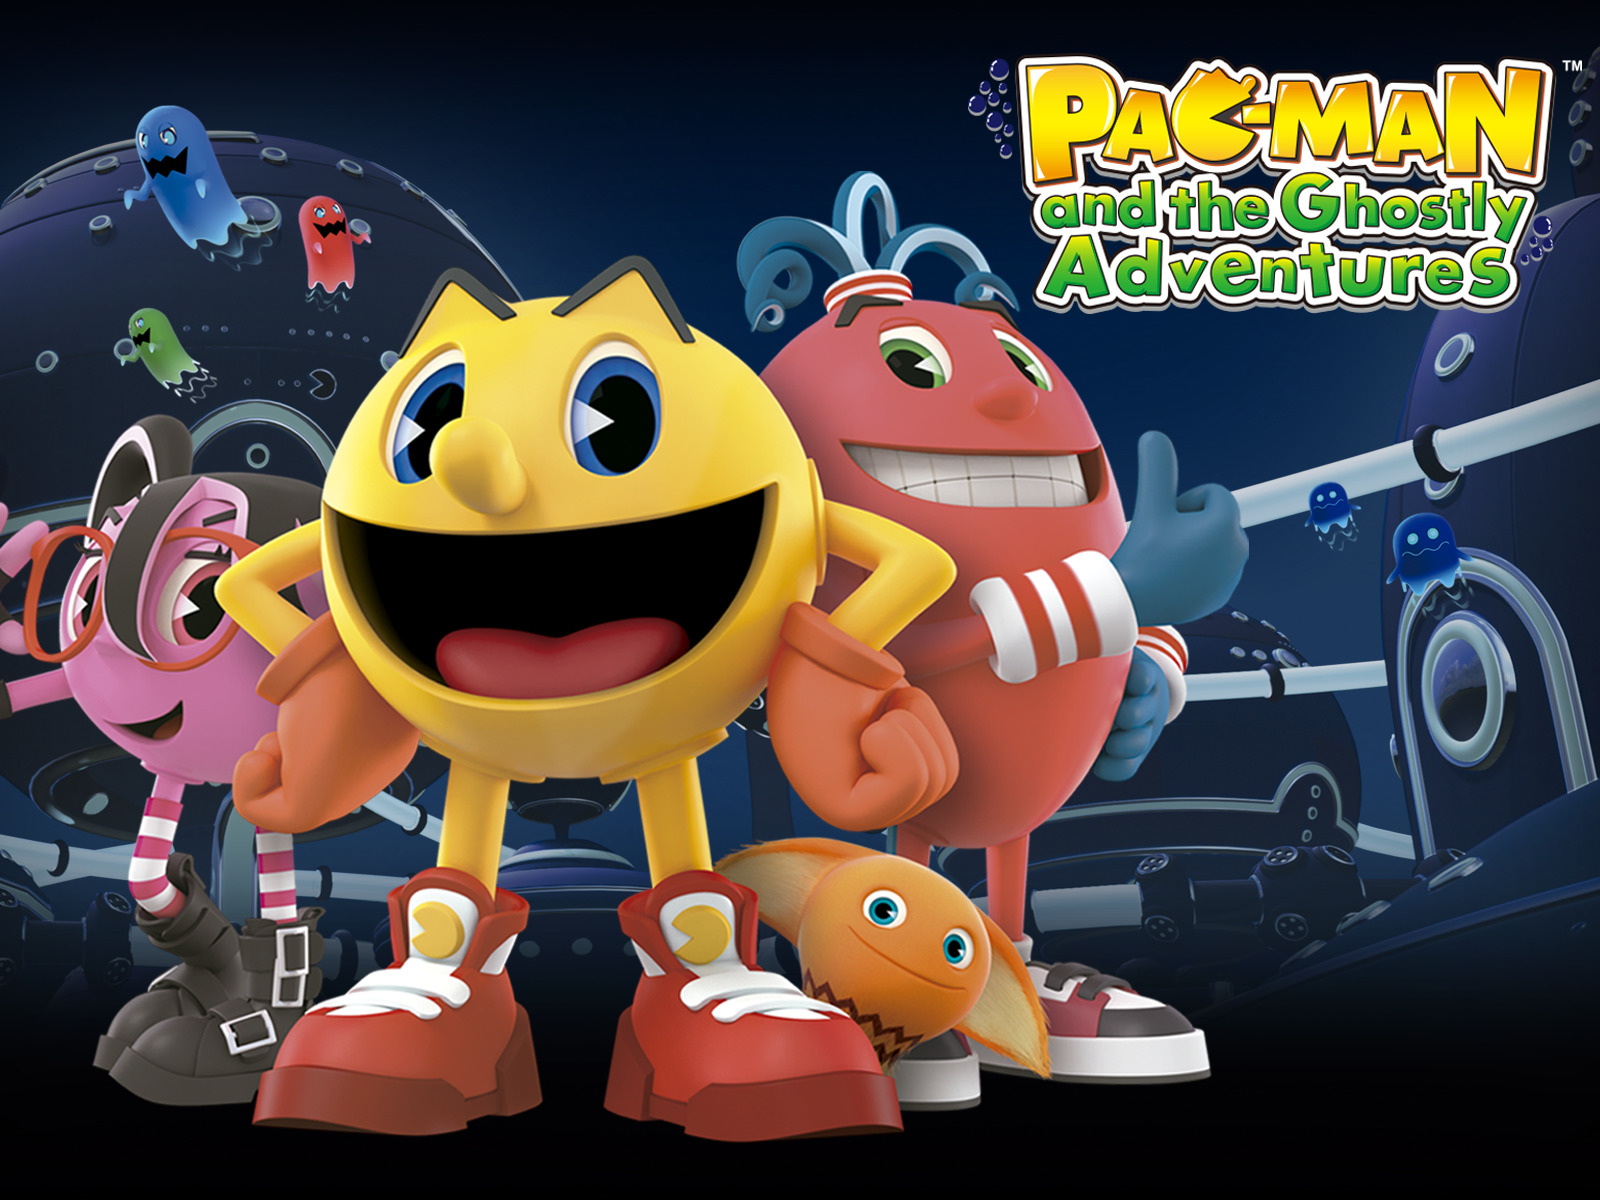 Prime Video: PAC MAN And The Ghostly Adventures